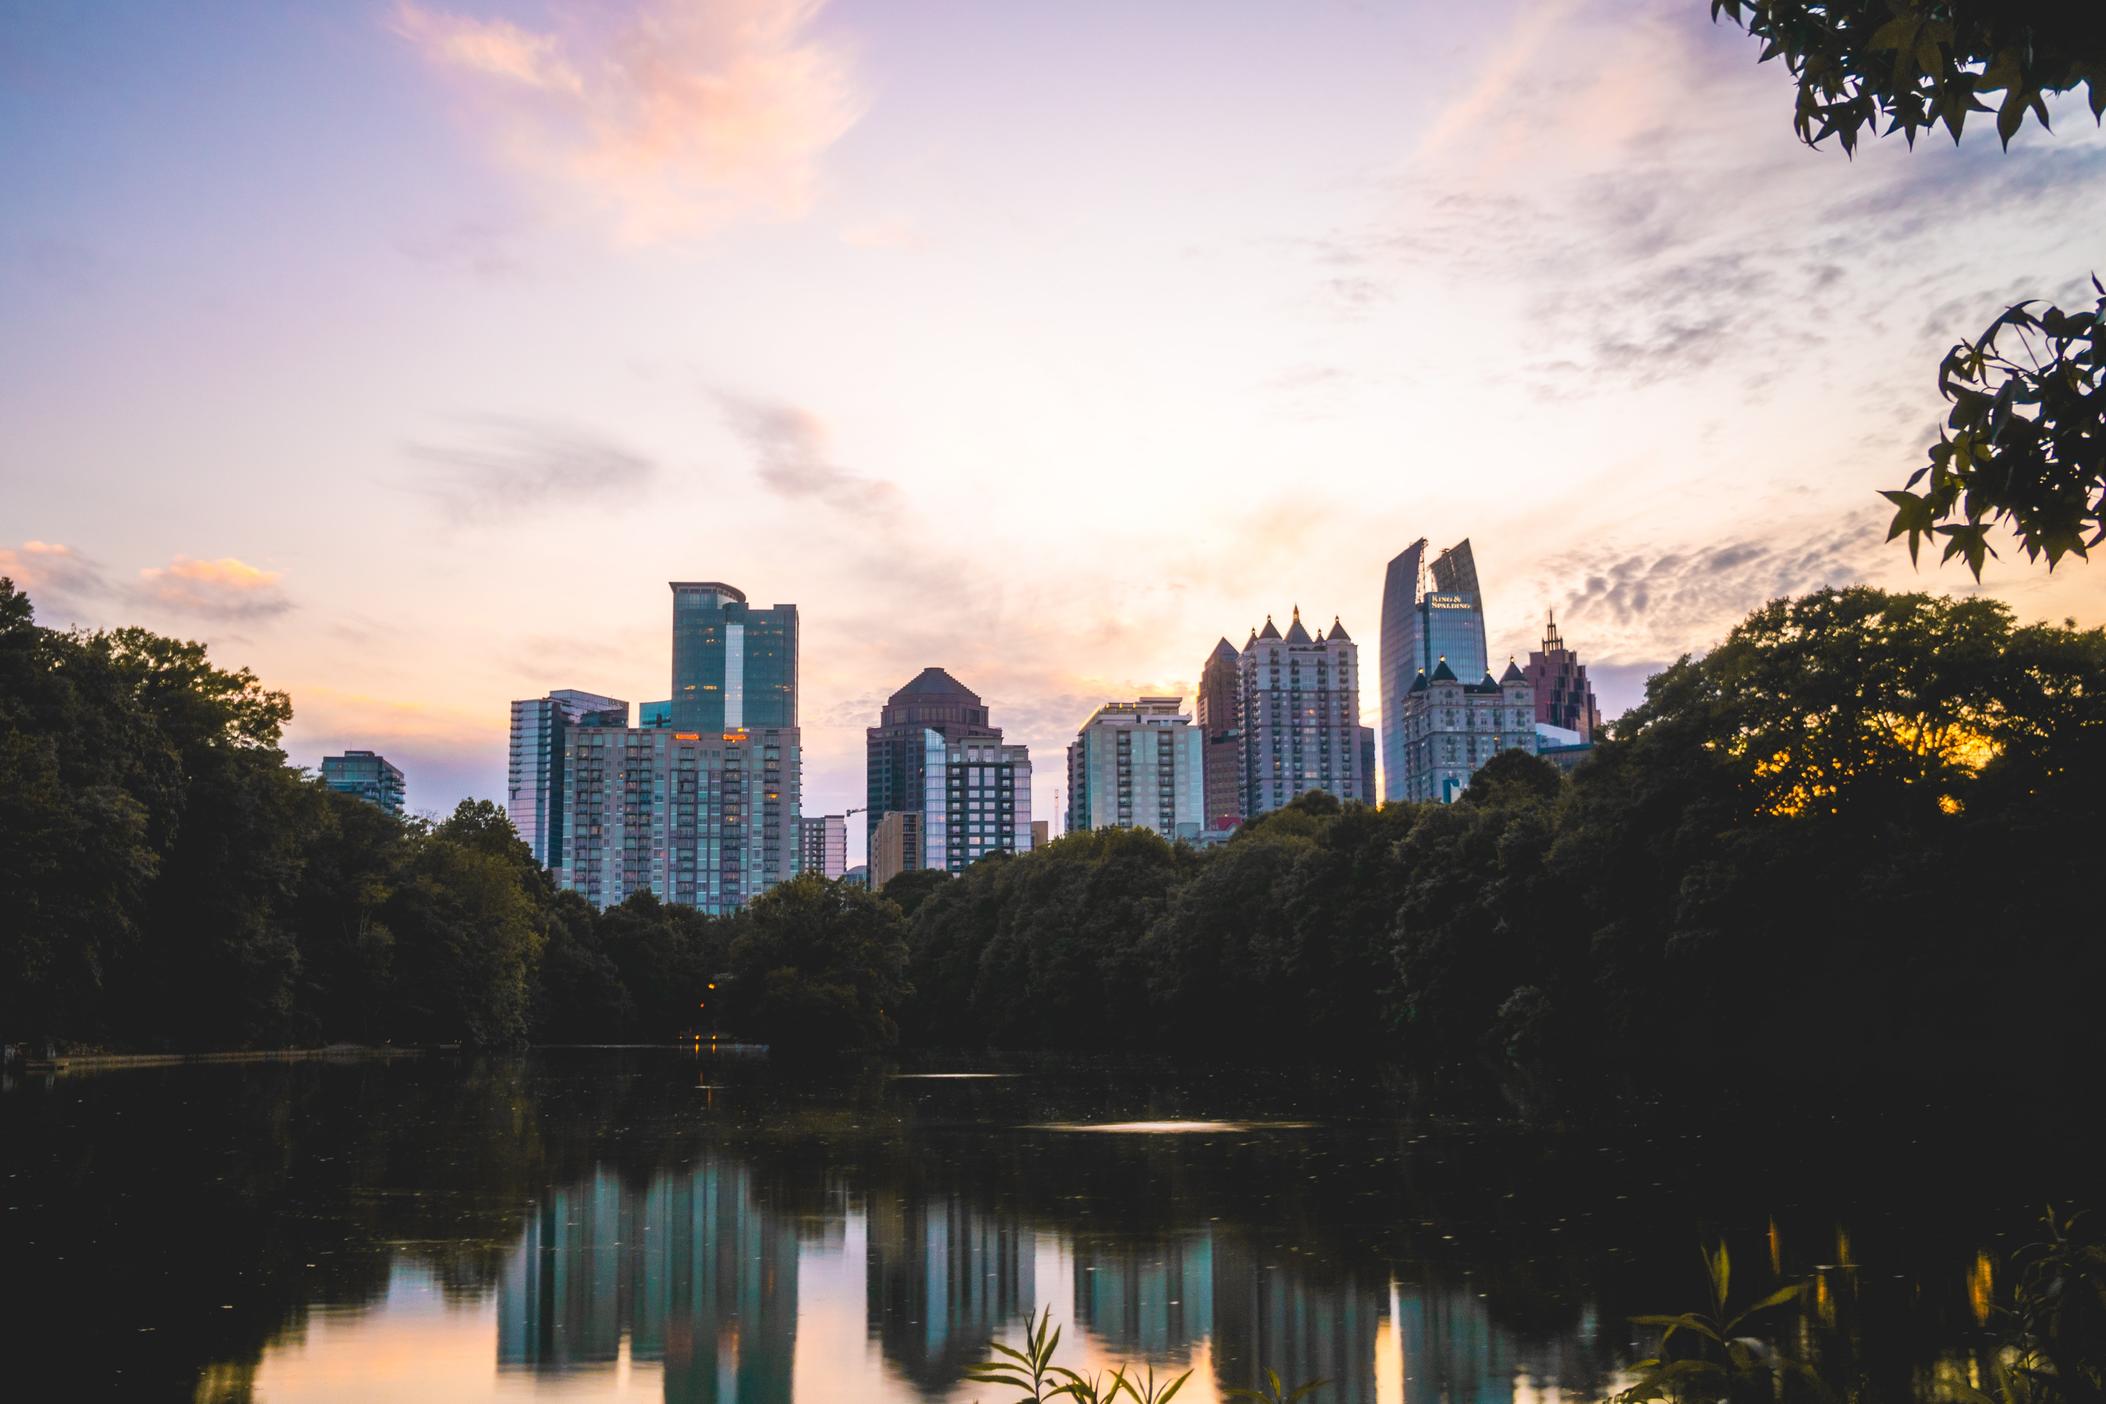 Atlanta was recently ranked as one of the best large cities to start a new business.